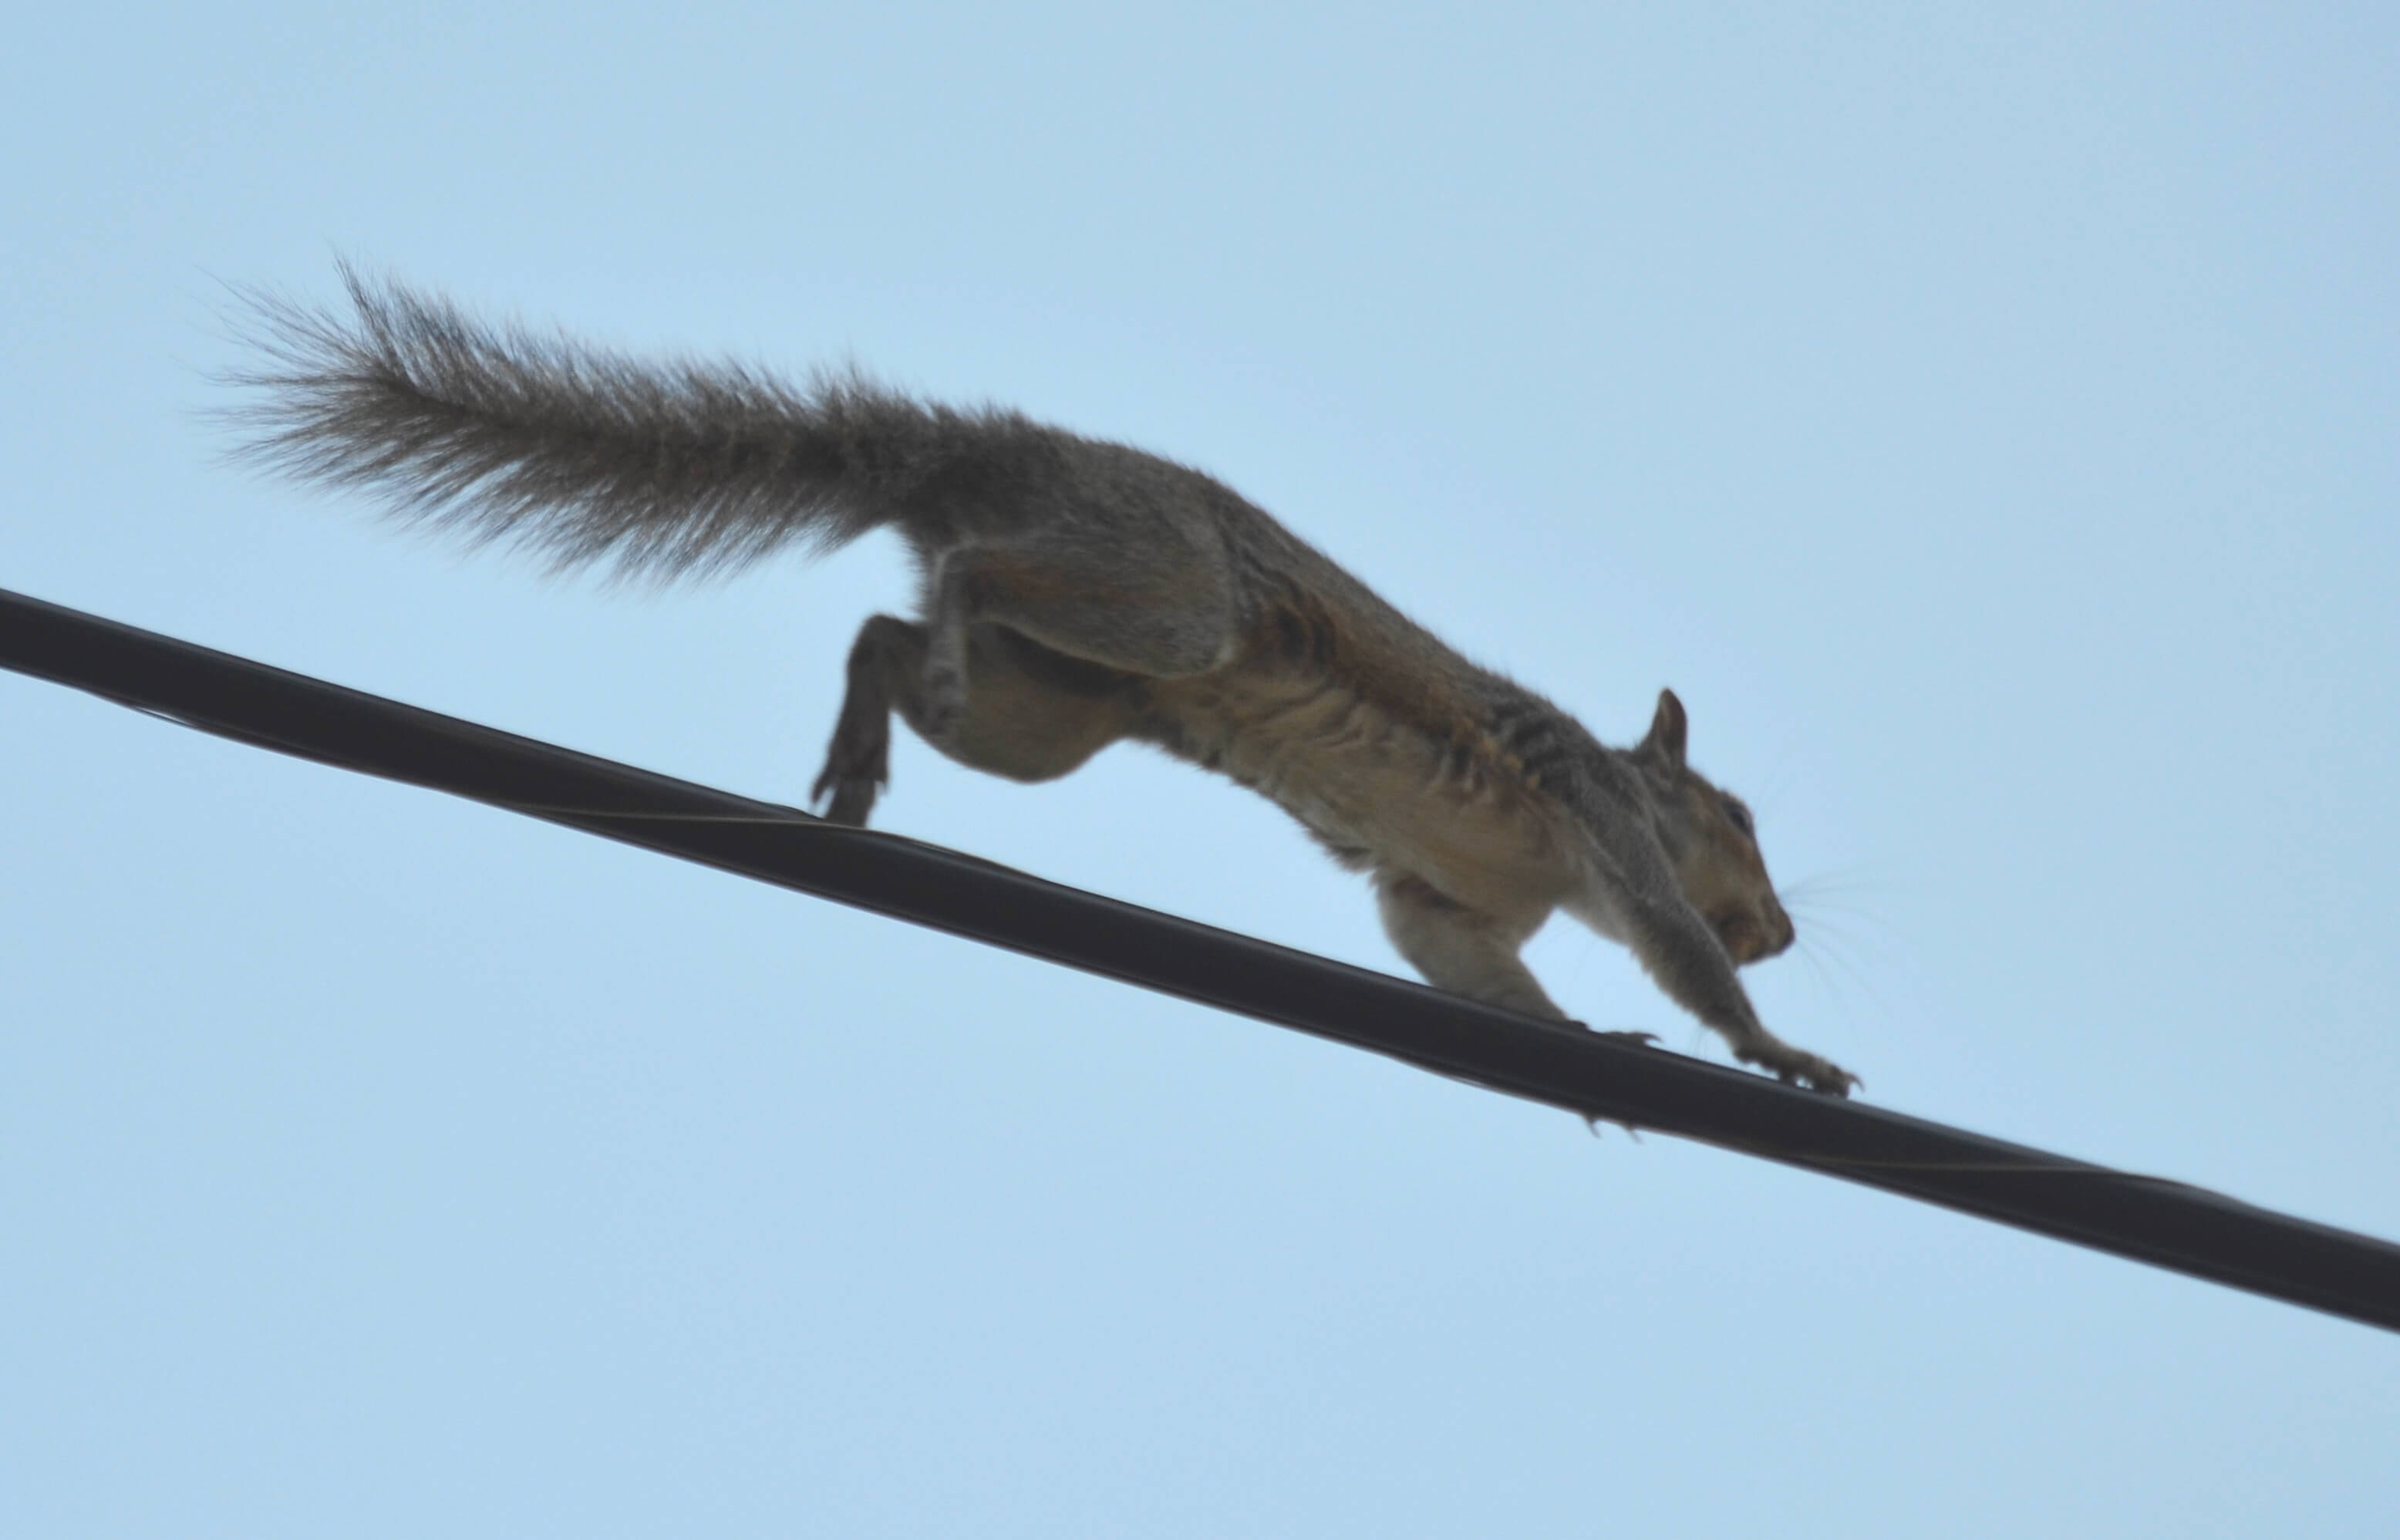 A squirrel running on a utility line